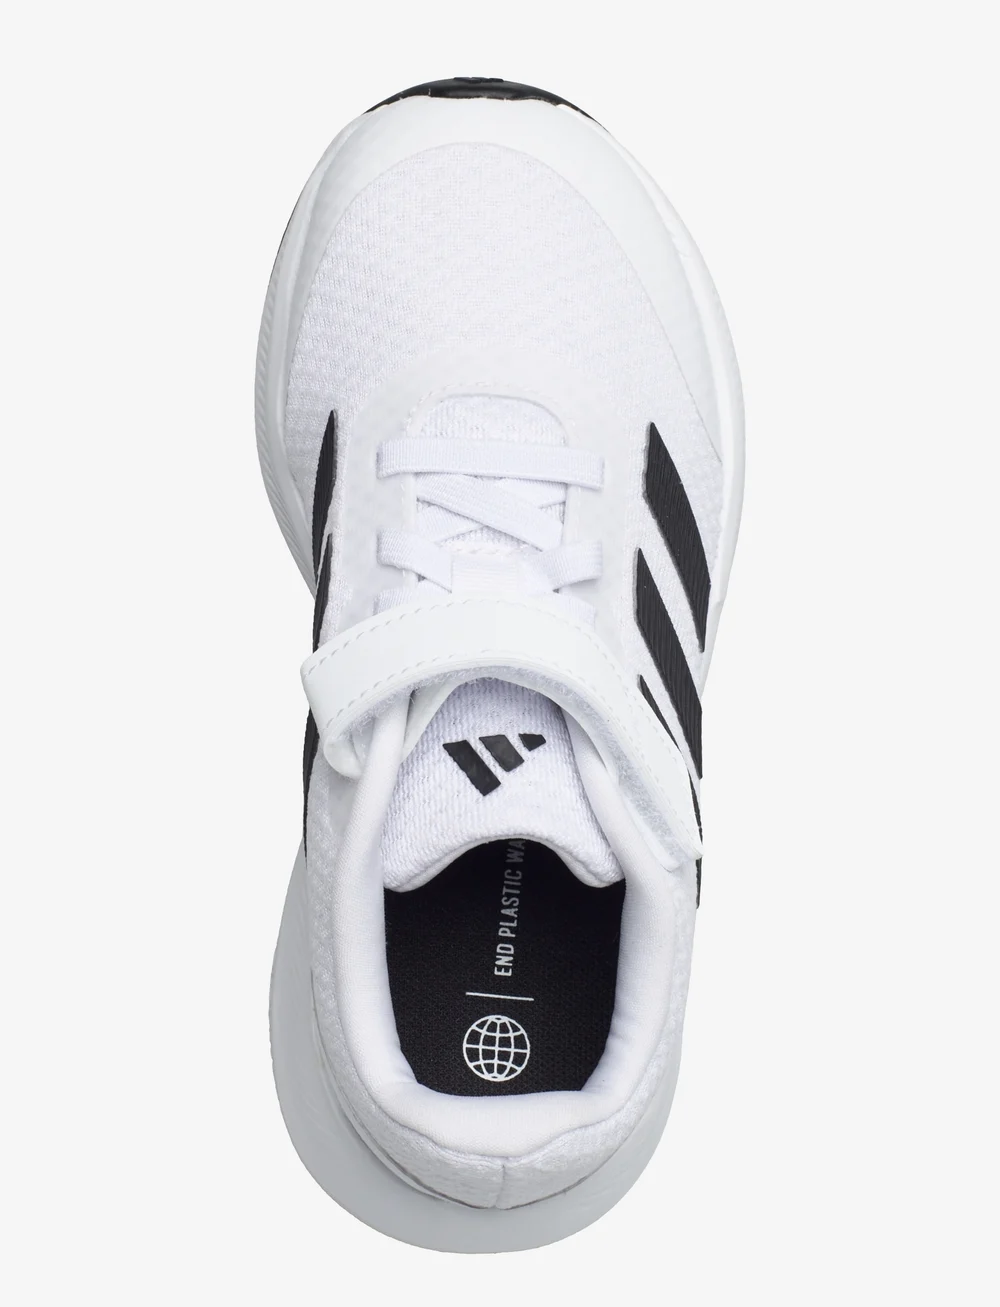 adidas Performance Runfalcon 3.0 Elastic Lace Top Strap Shoes - Sneakers